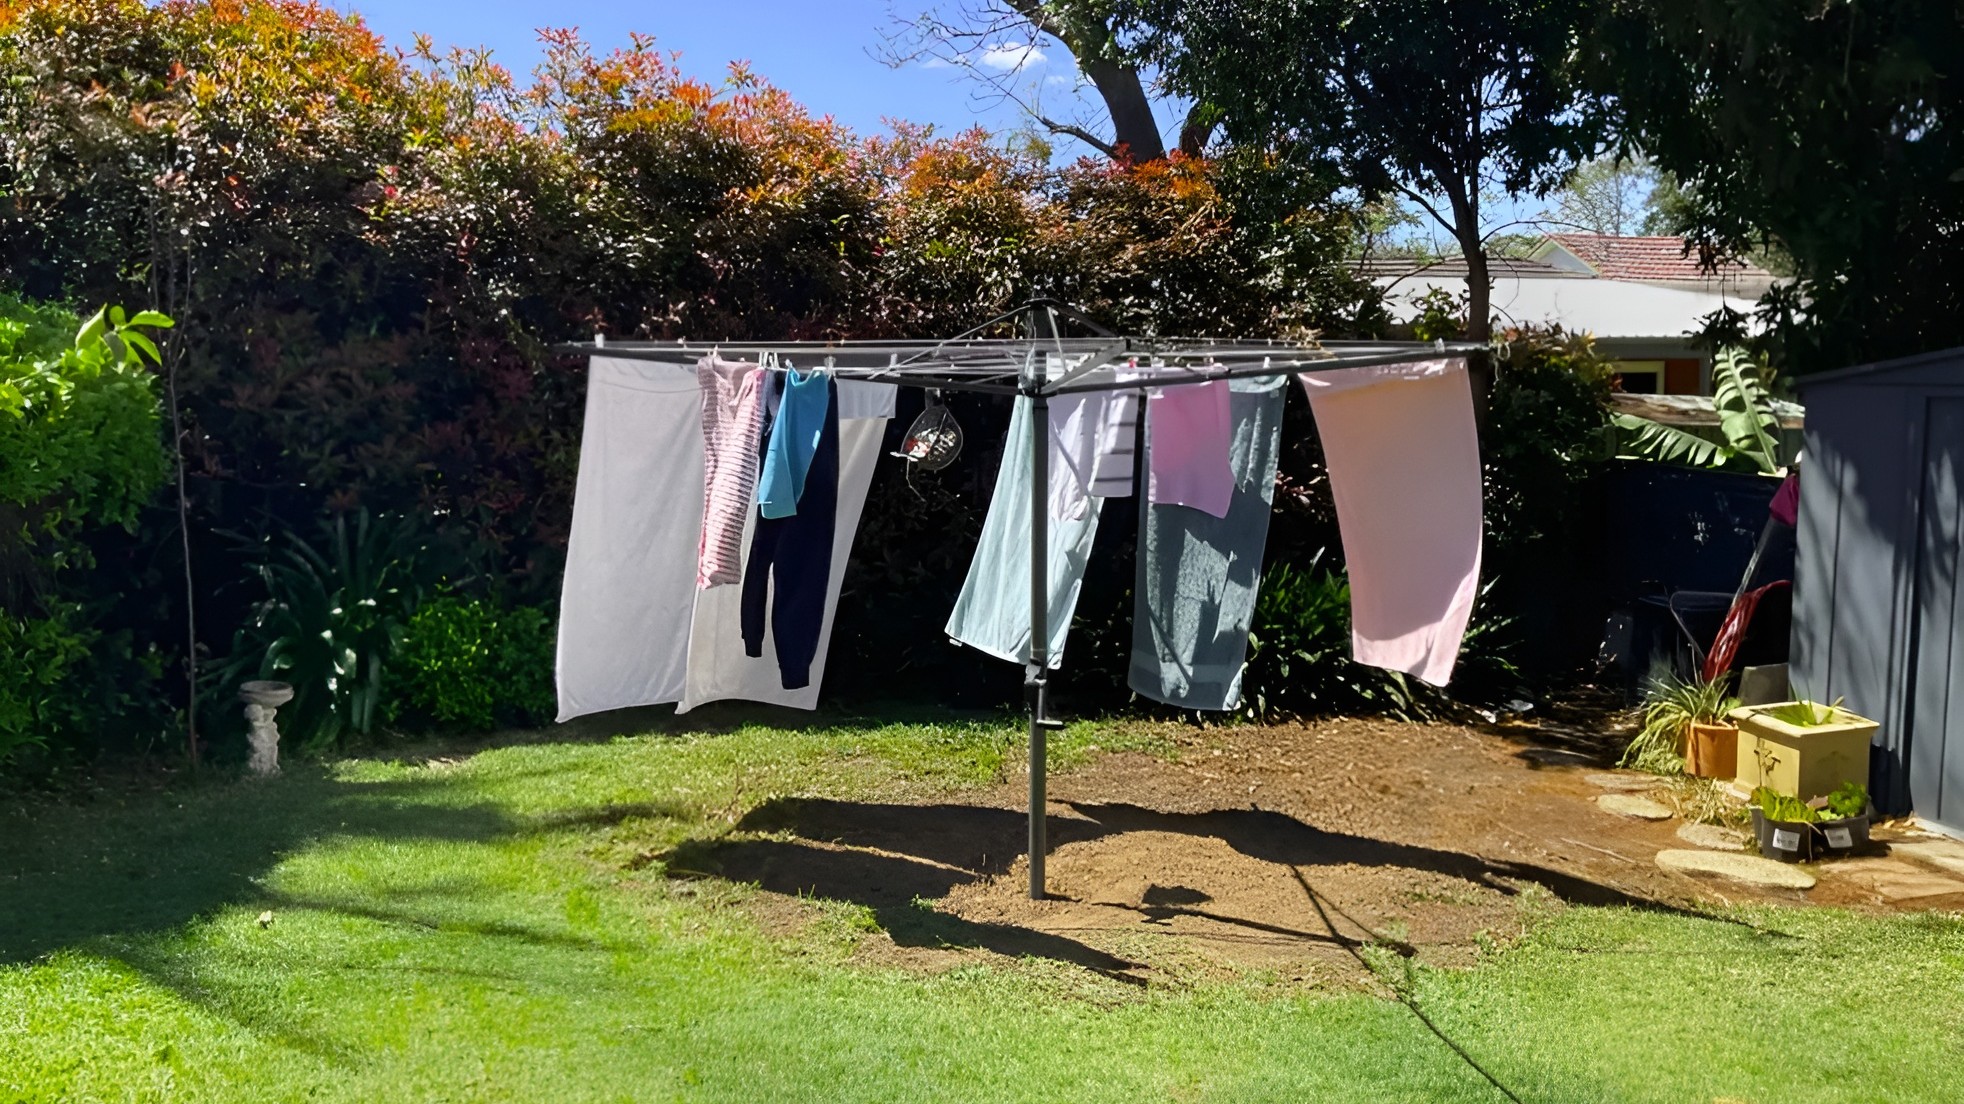 Clothesline Ideas for Small Spaces Why These Clotheslines are Not for Me?